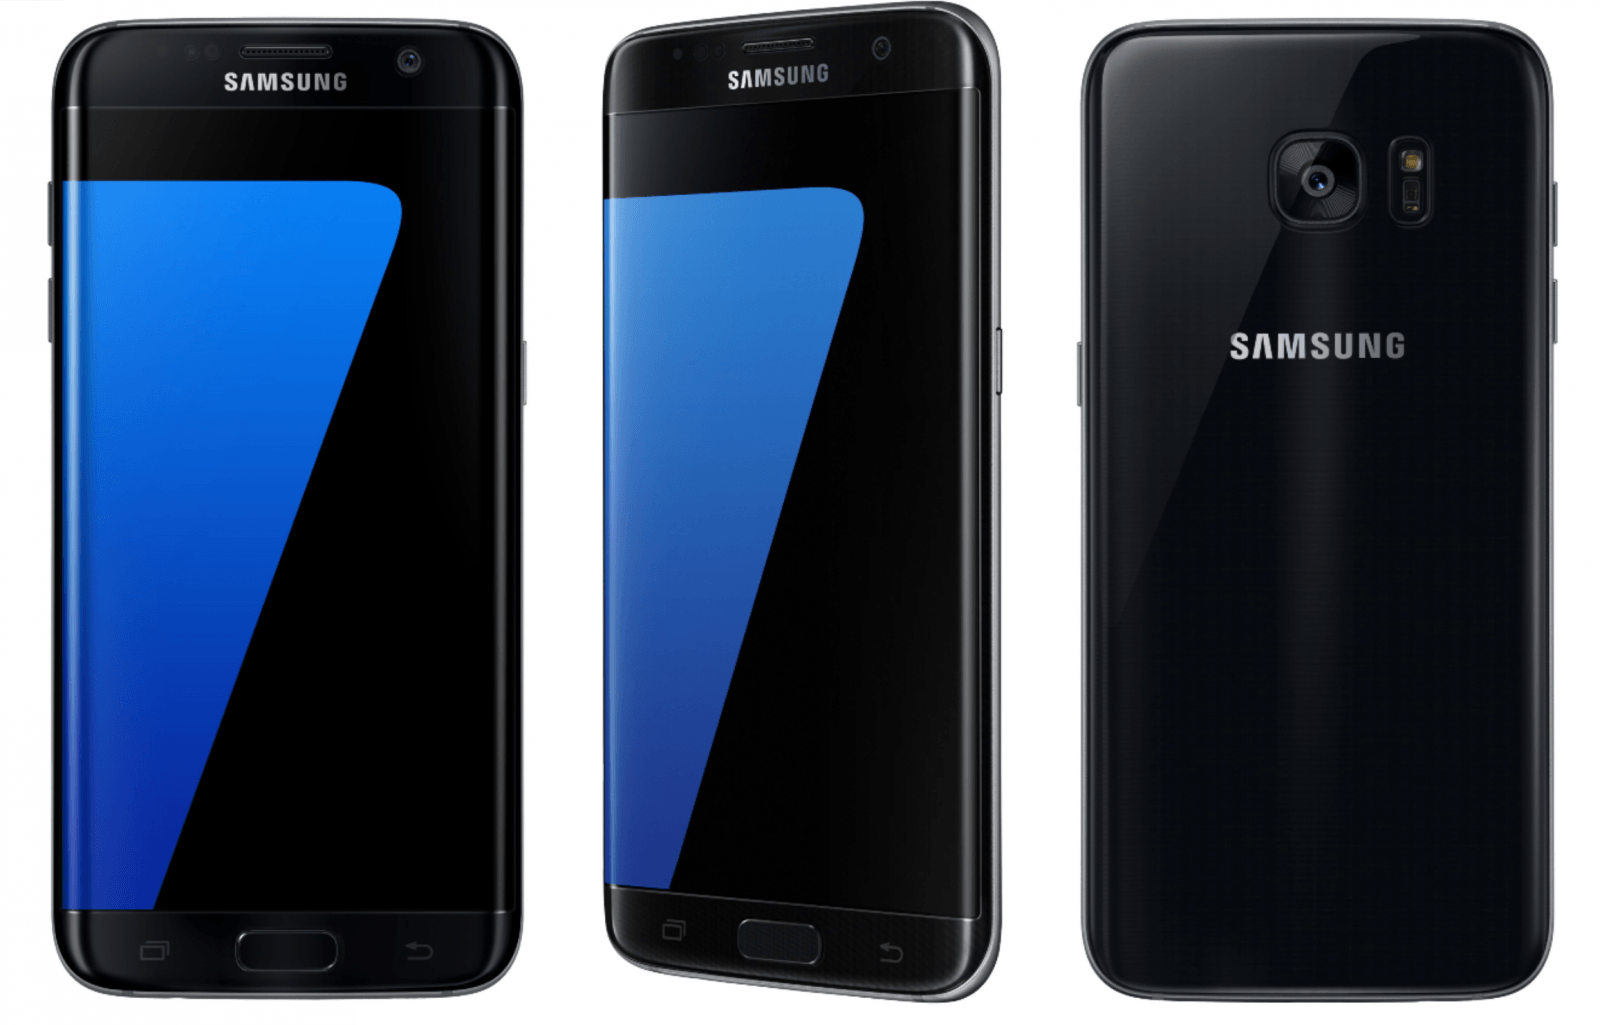 Samsung S New Galaxy S7 And Edge Bring Better Designs Incredible